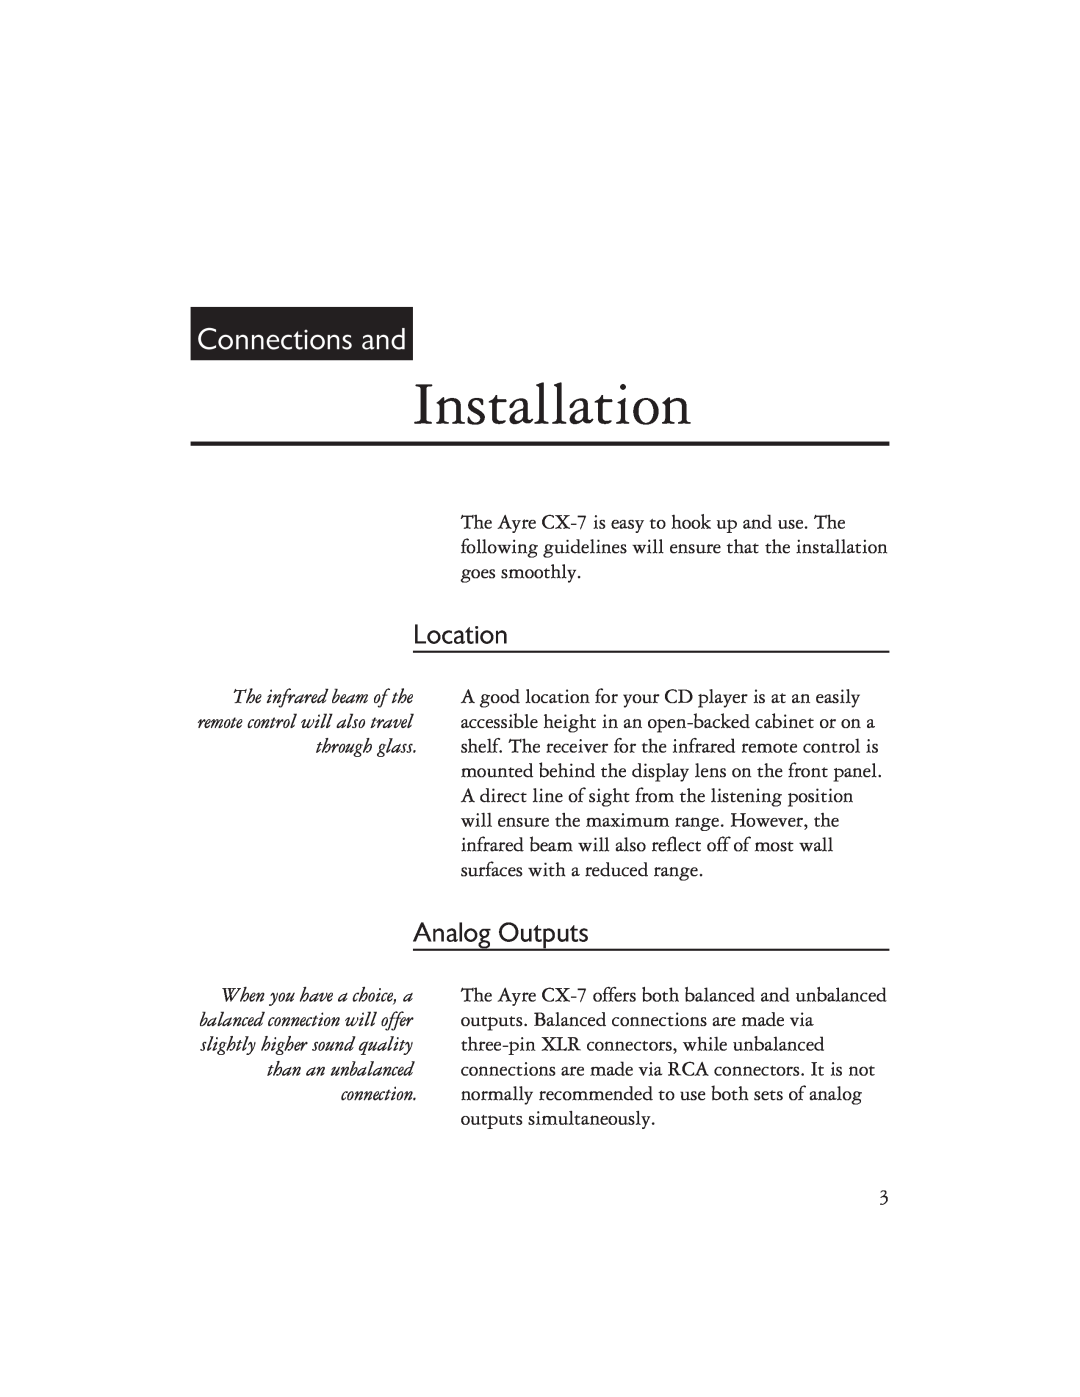 Ayre Acoustics CX-7 owner manual Installation, Connections and, Location, Analog Outputs 